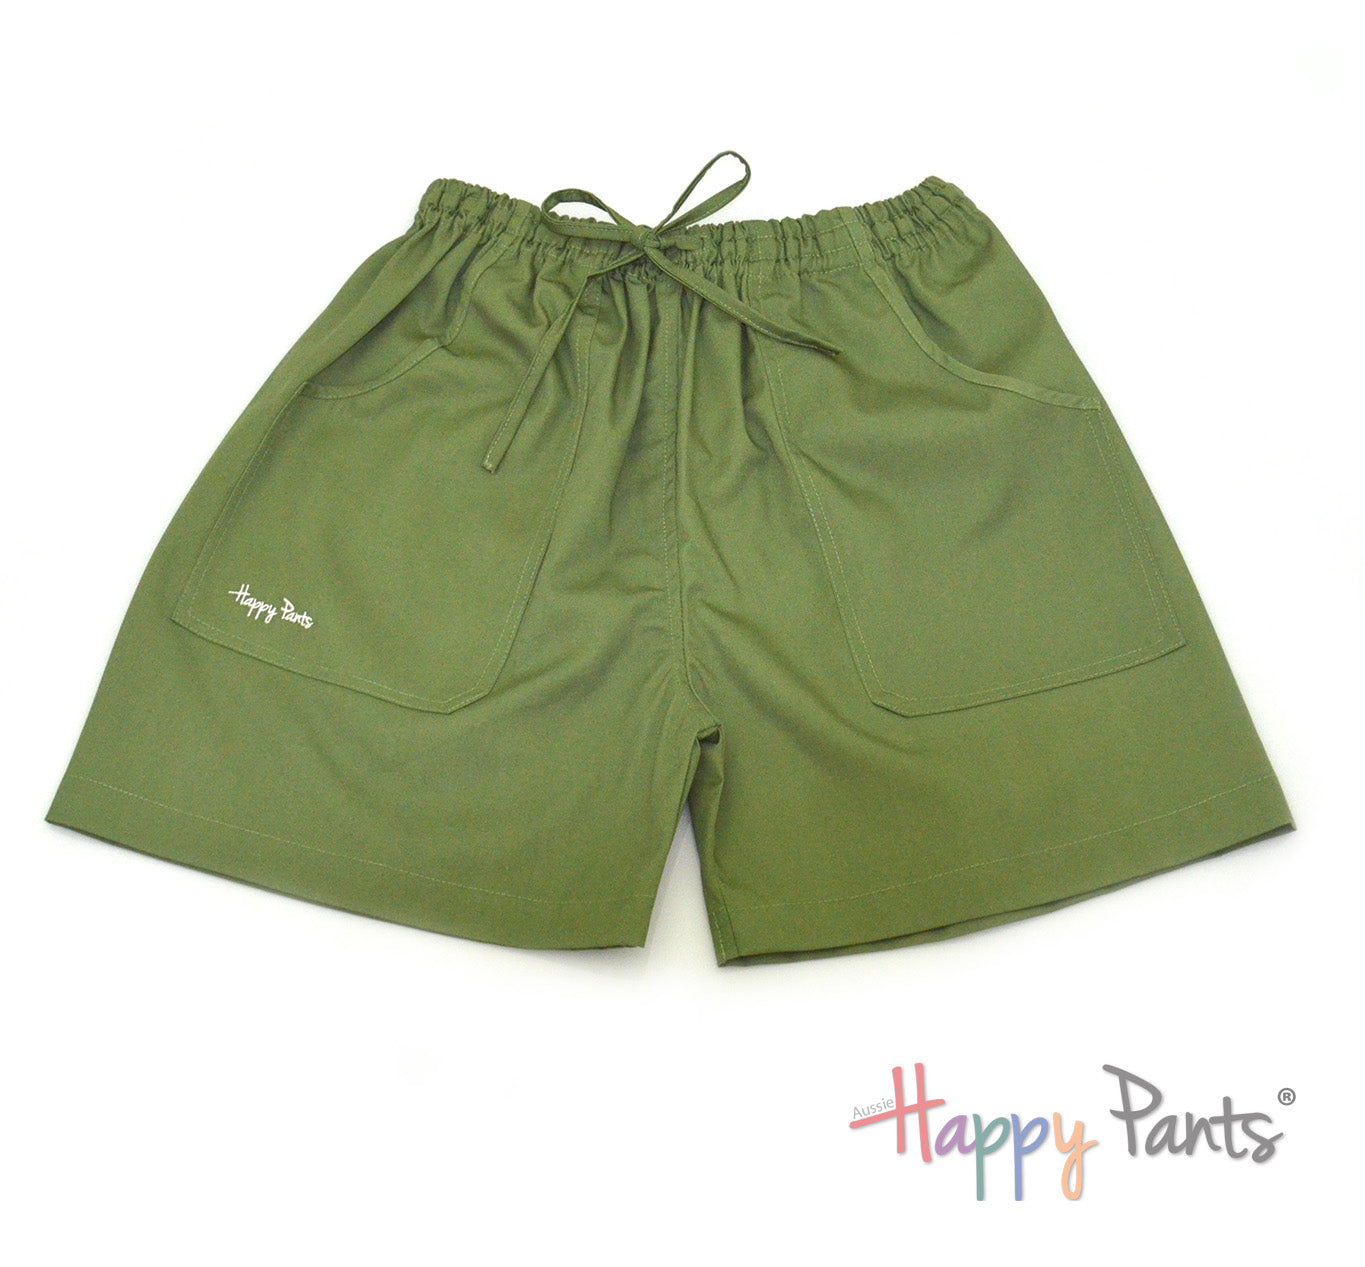 Green cotton shorts elastic waist summer Happy Pants fun and colourful clothes